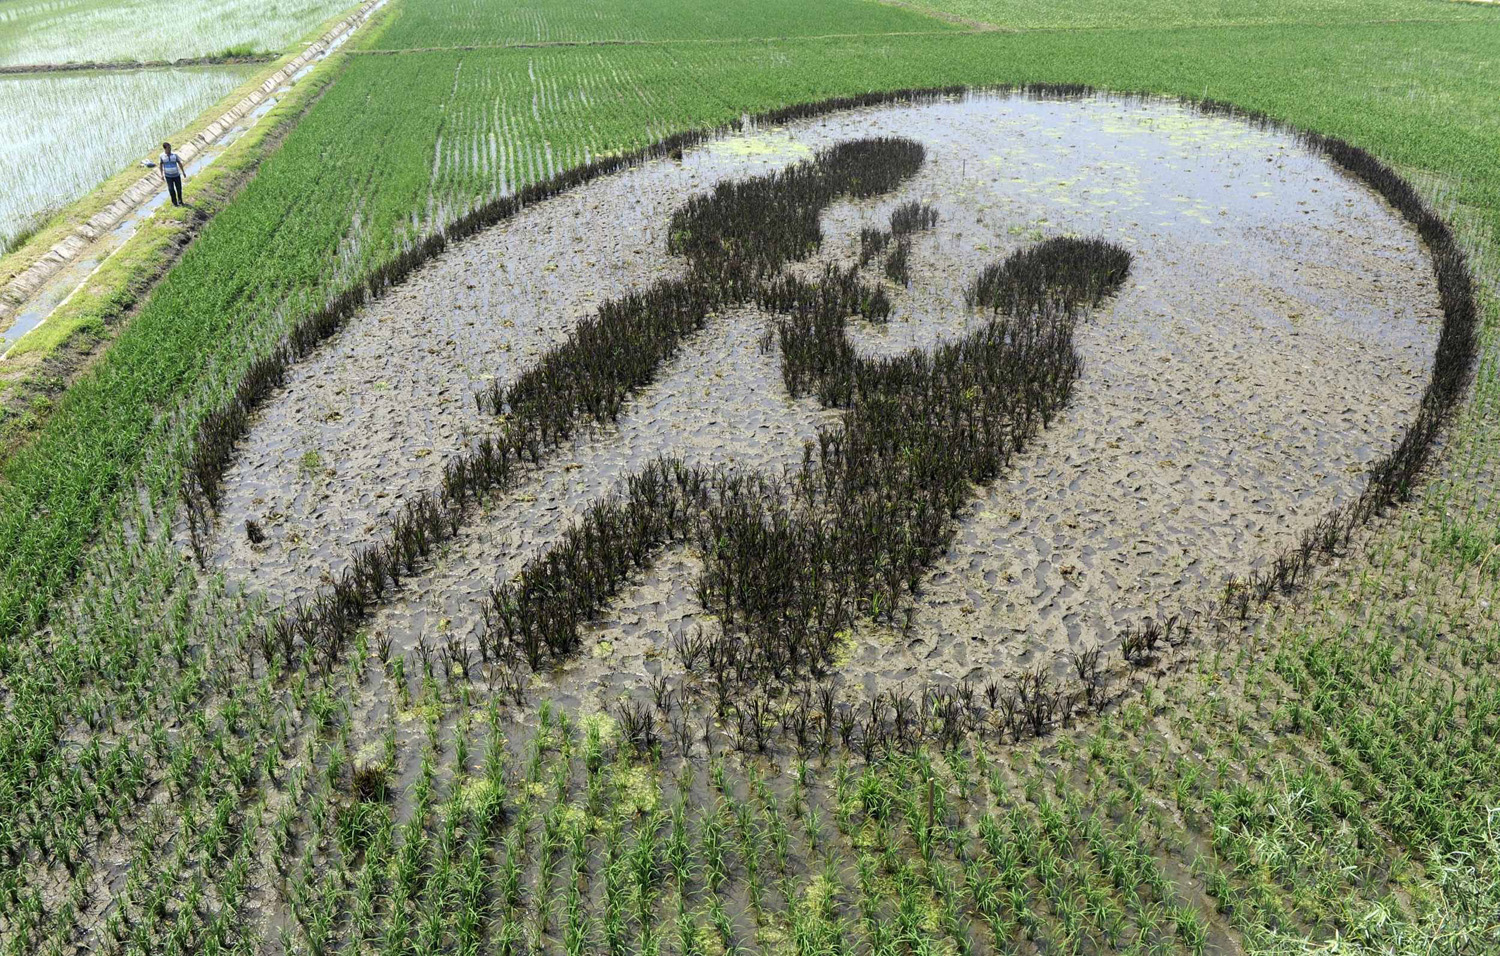 A man walks by a mural made of rice plants at a paddy field in Shenyang, Liaoning province, China on June 23, 2014.